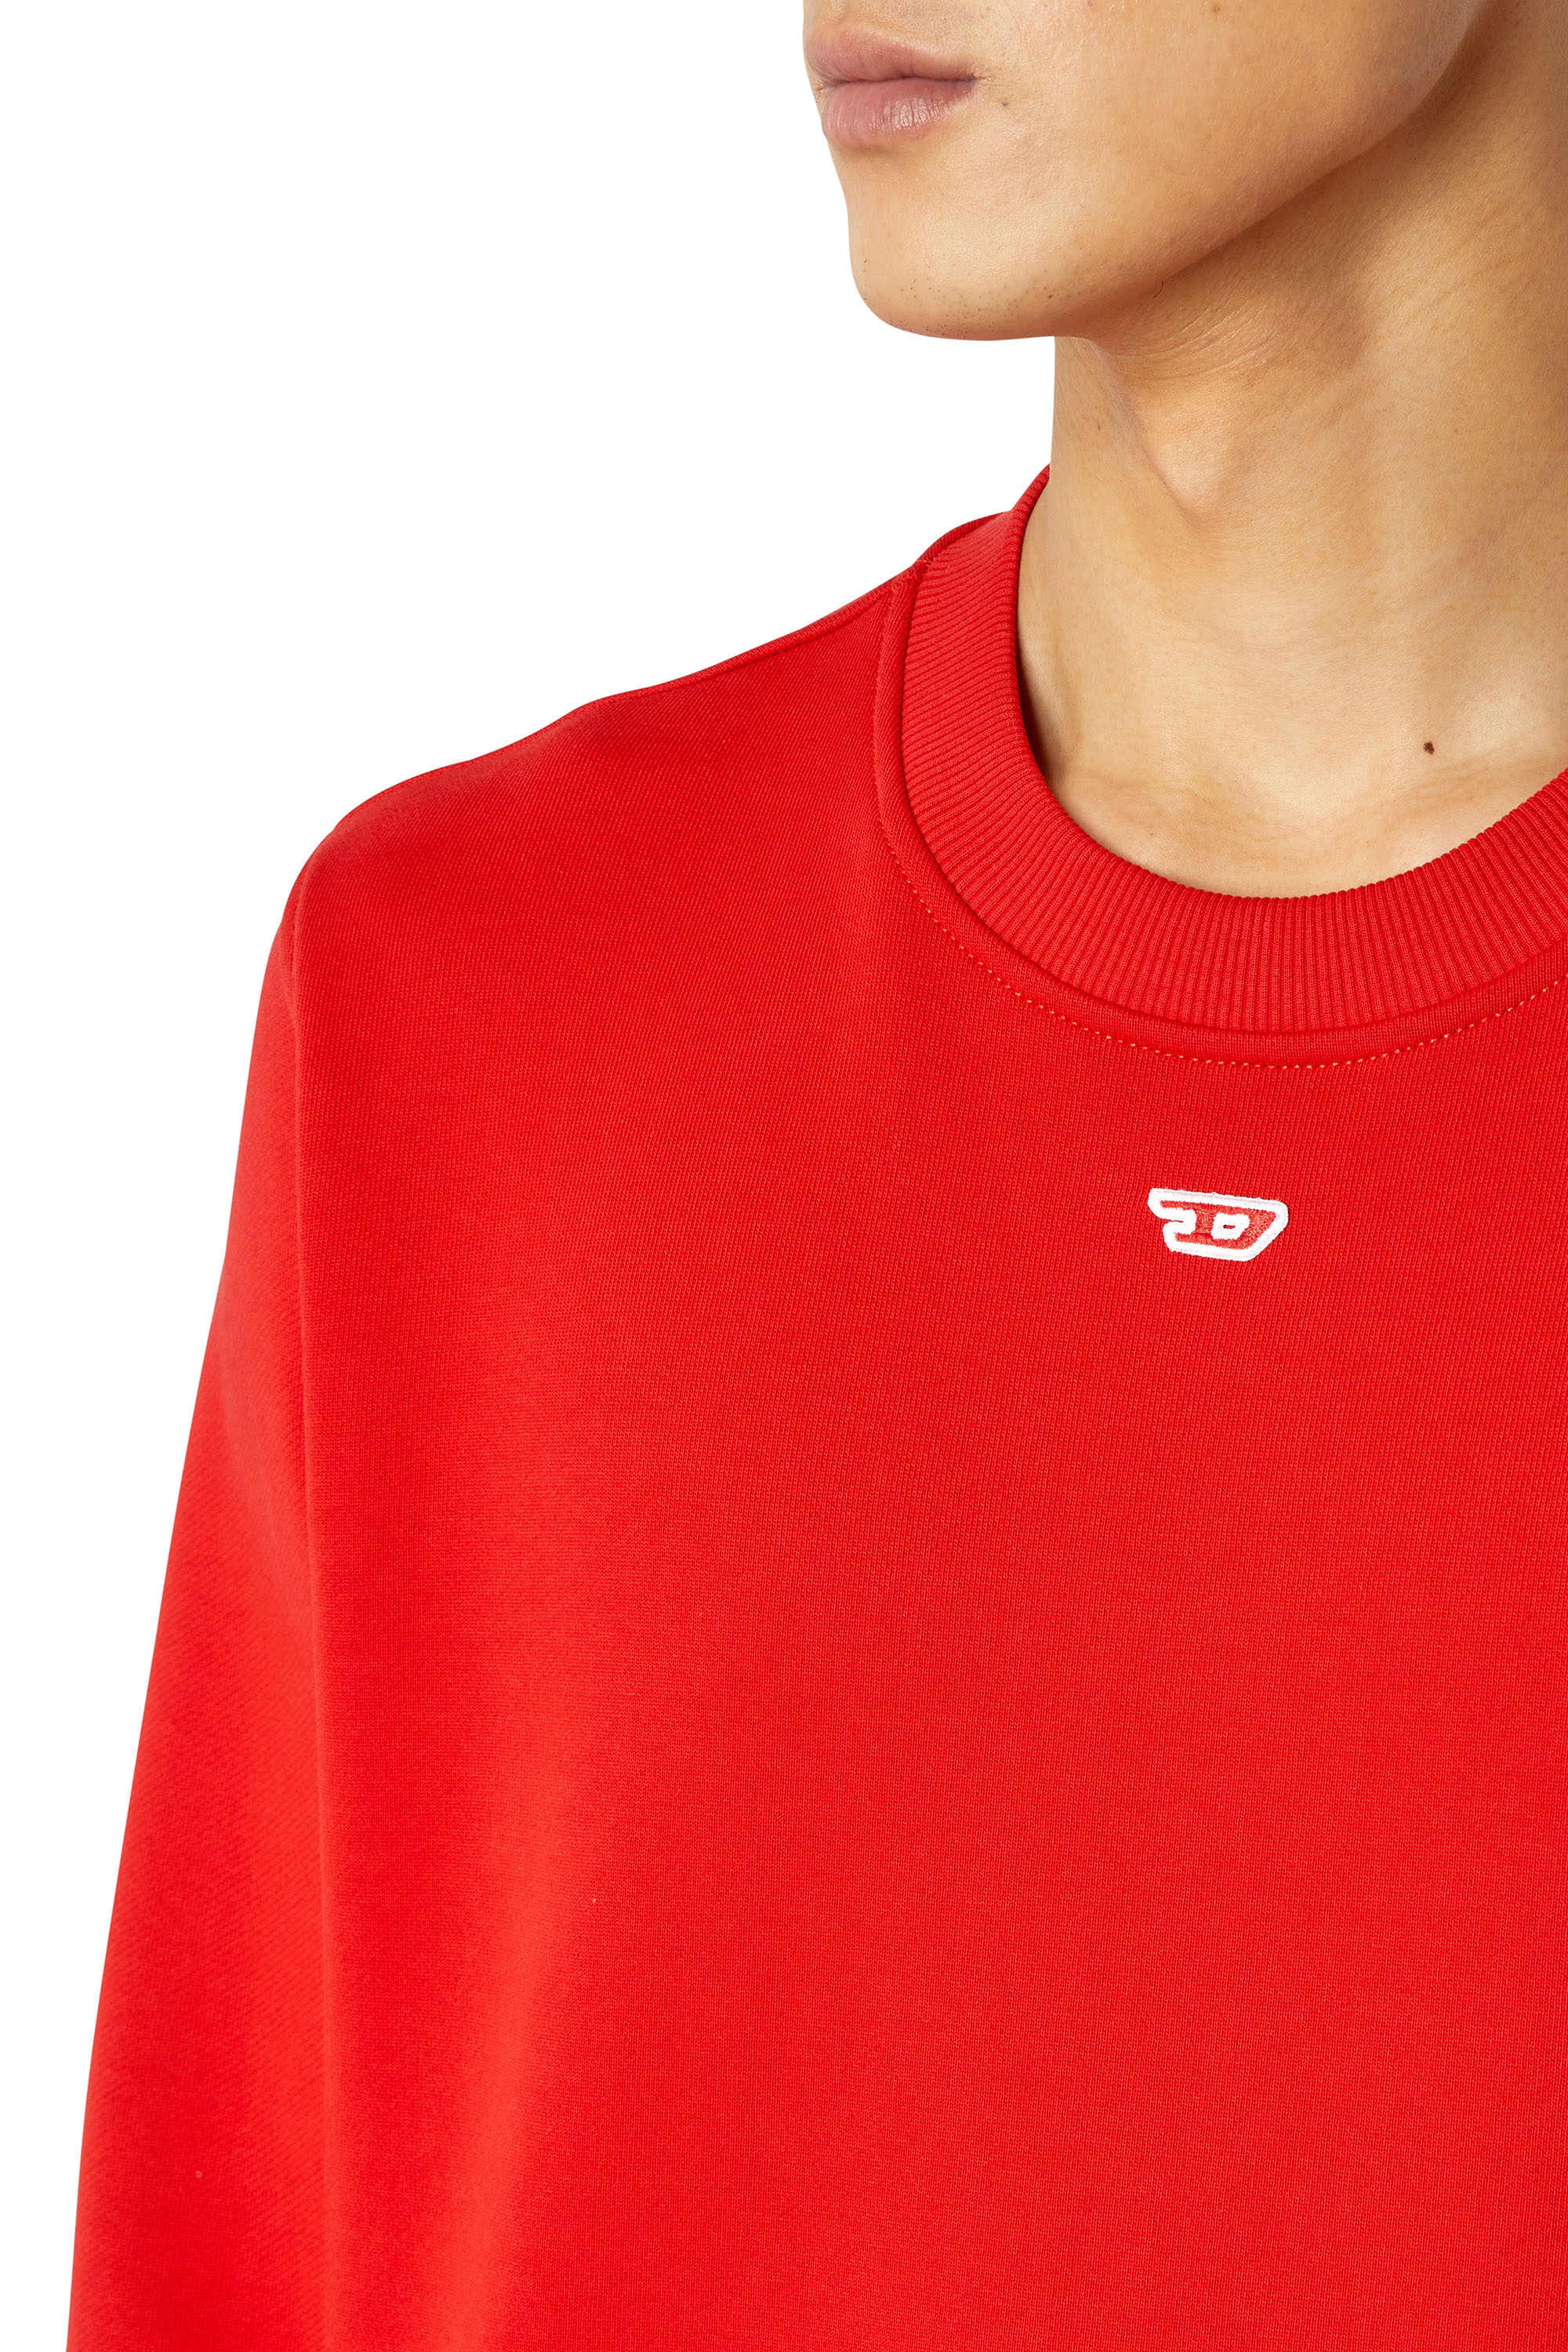 Diesel - S-GINN-D, Unisex Sweatshirt with mini D patch in Red - Image 4